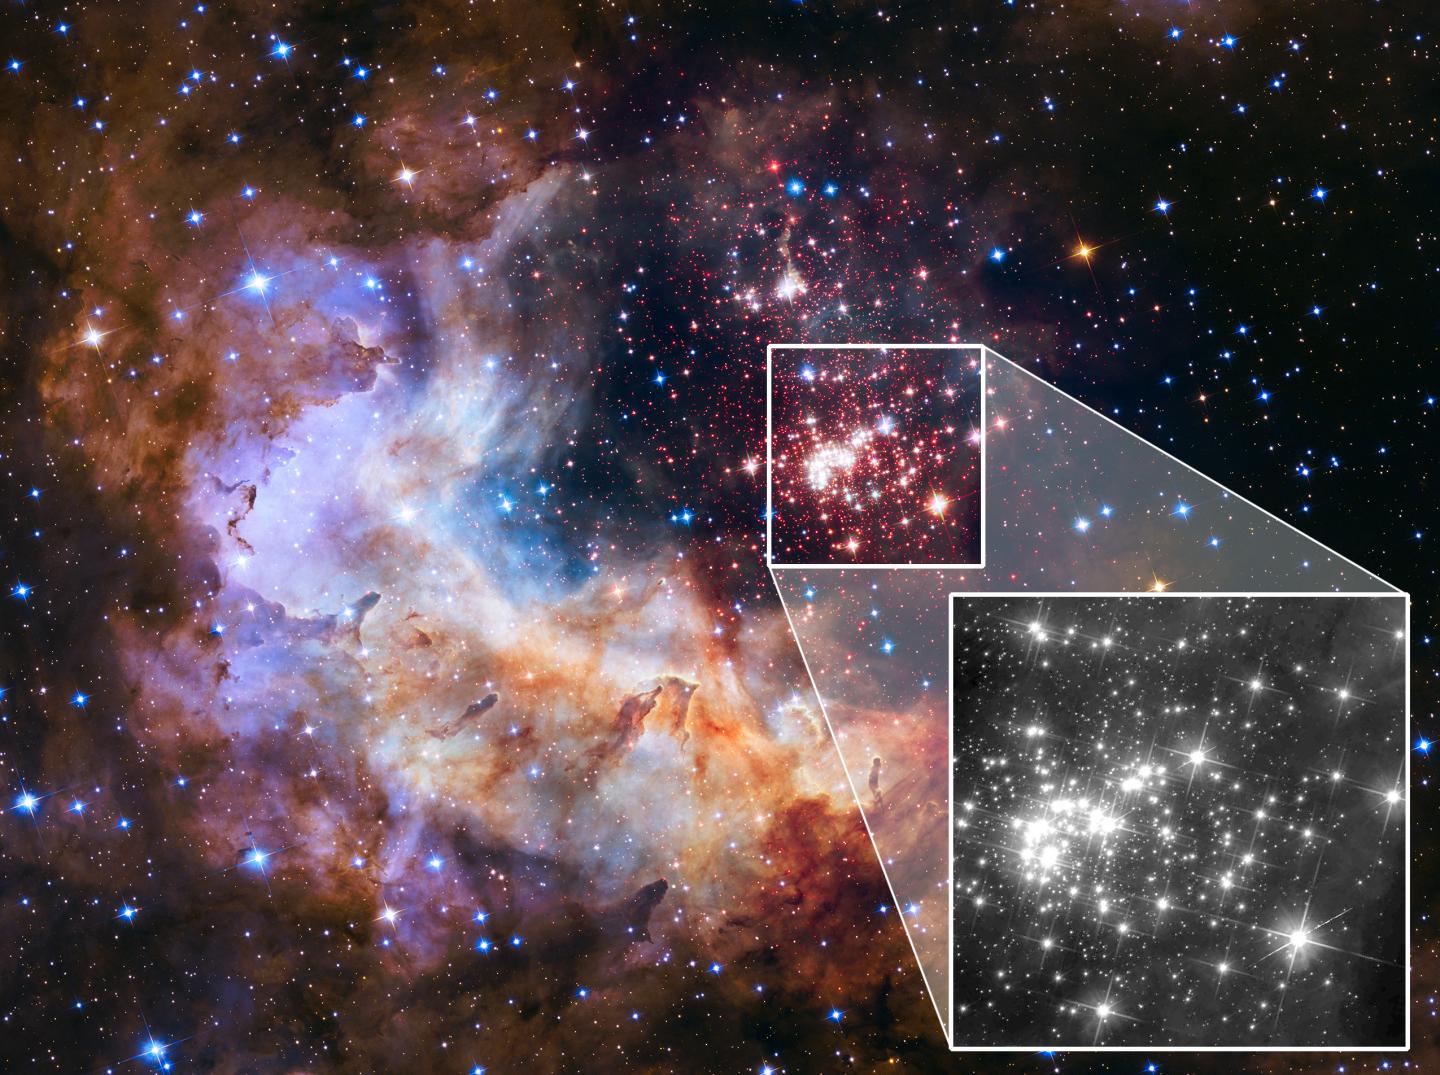 Hubble View of the Westerlund 2 Cluster